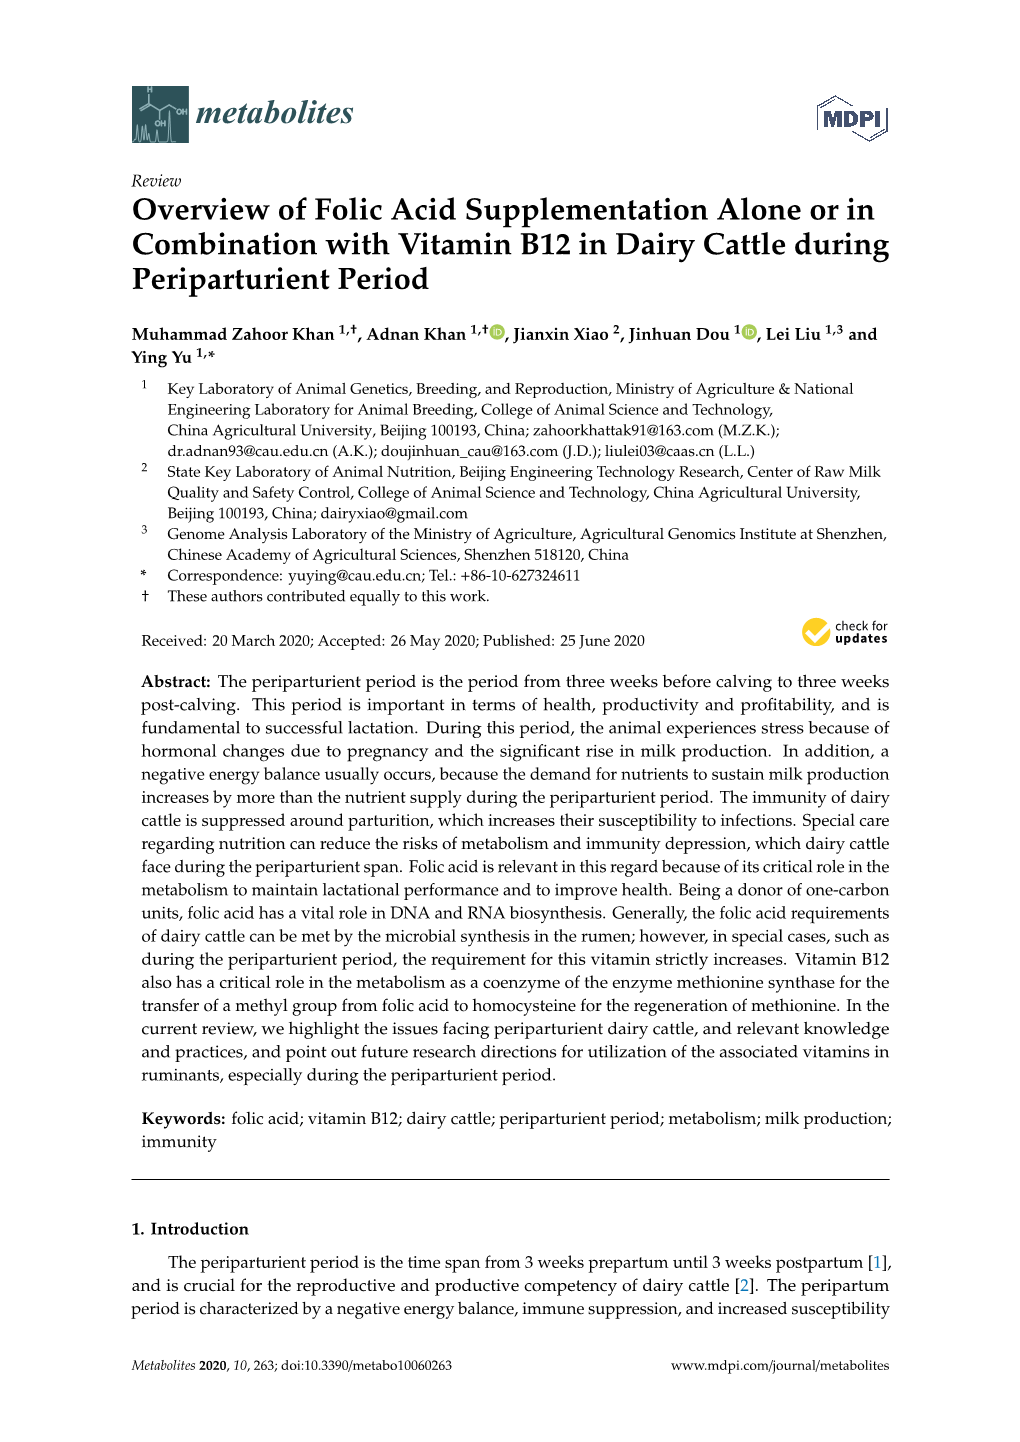 Overview of Folic Acid Supplementation Alone Or in Combination with Vitamin B12 in Dairy Cattle During Periparturient Period